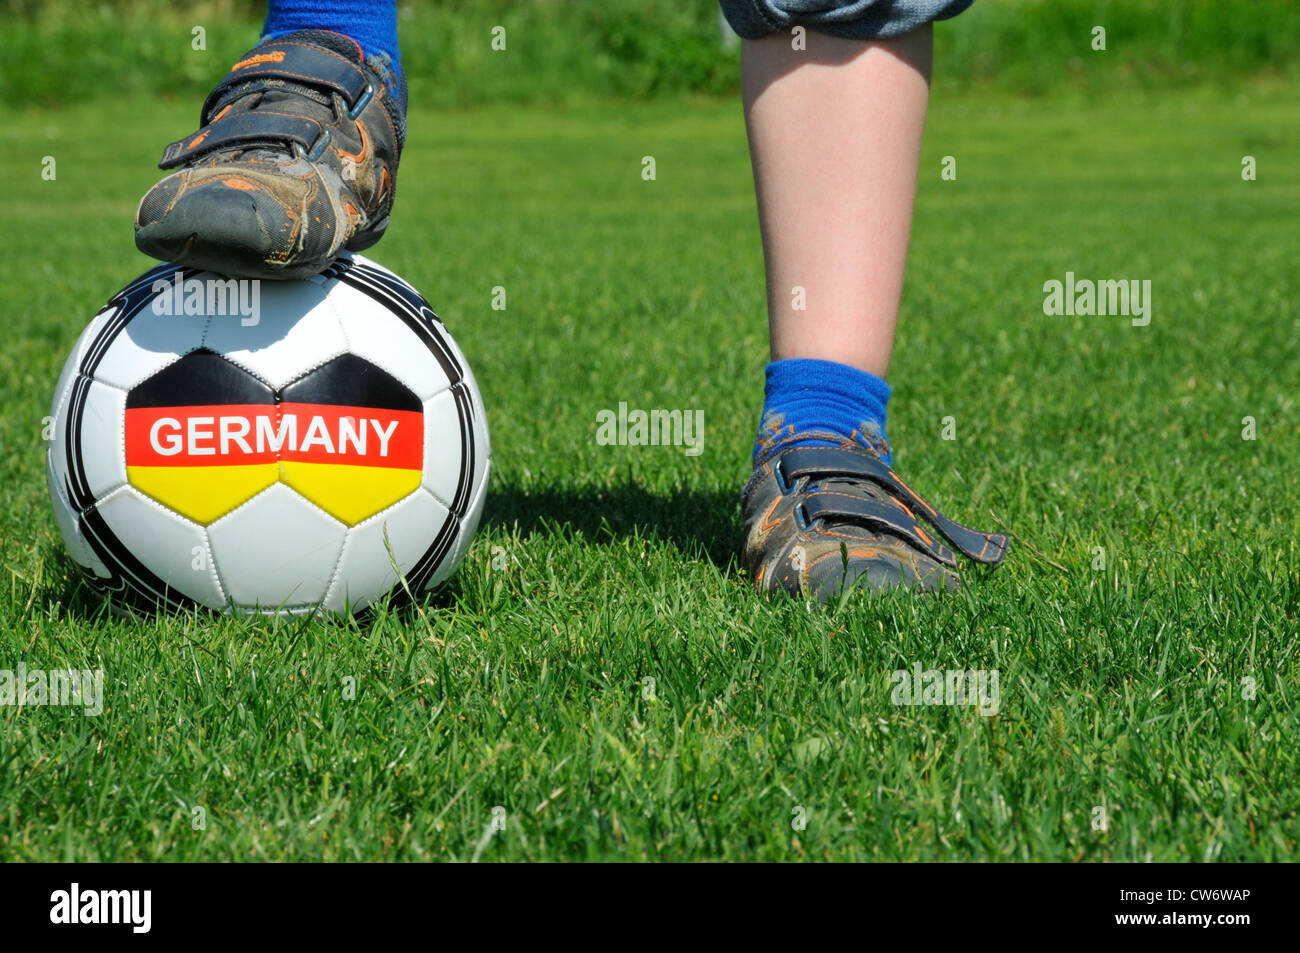 a boy's foot on a football with the writing 'Germany', Germany, Baden-Wuerttemberg Stock Photo